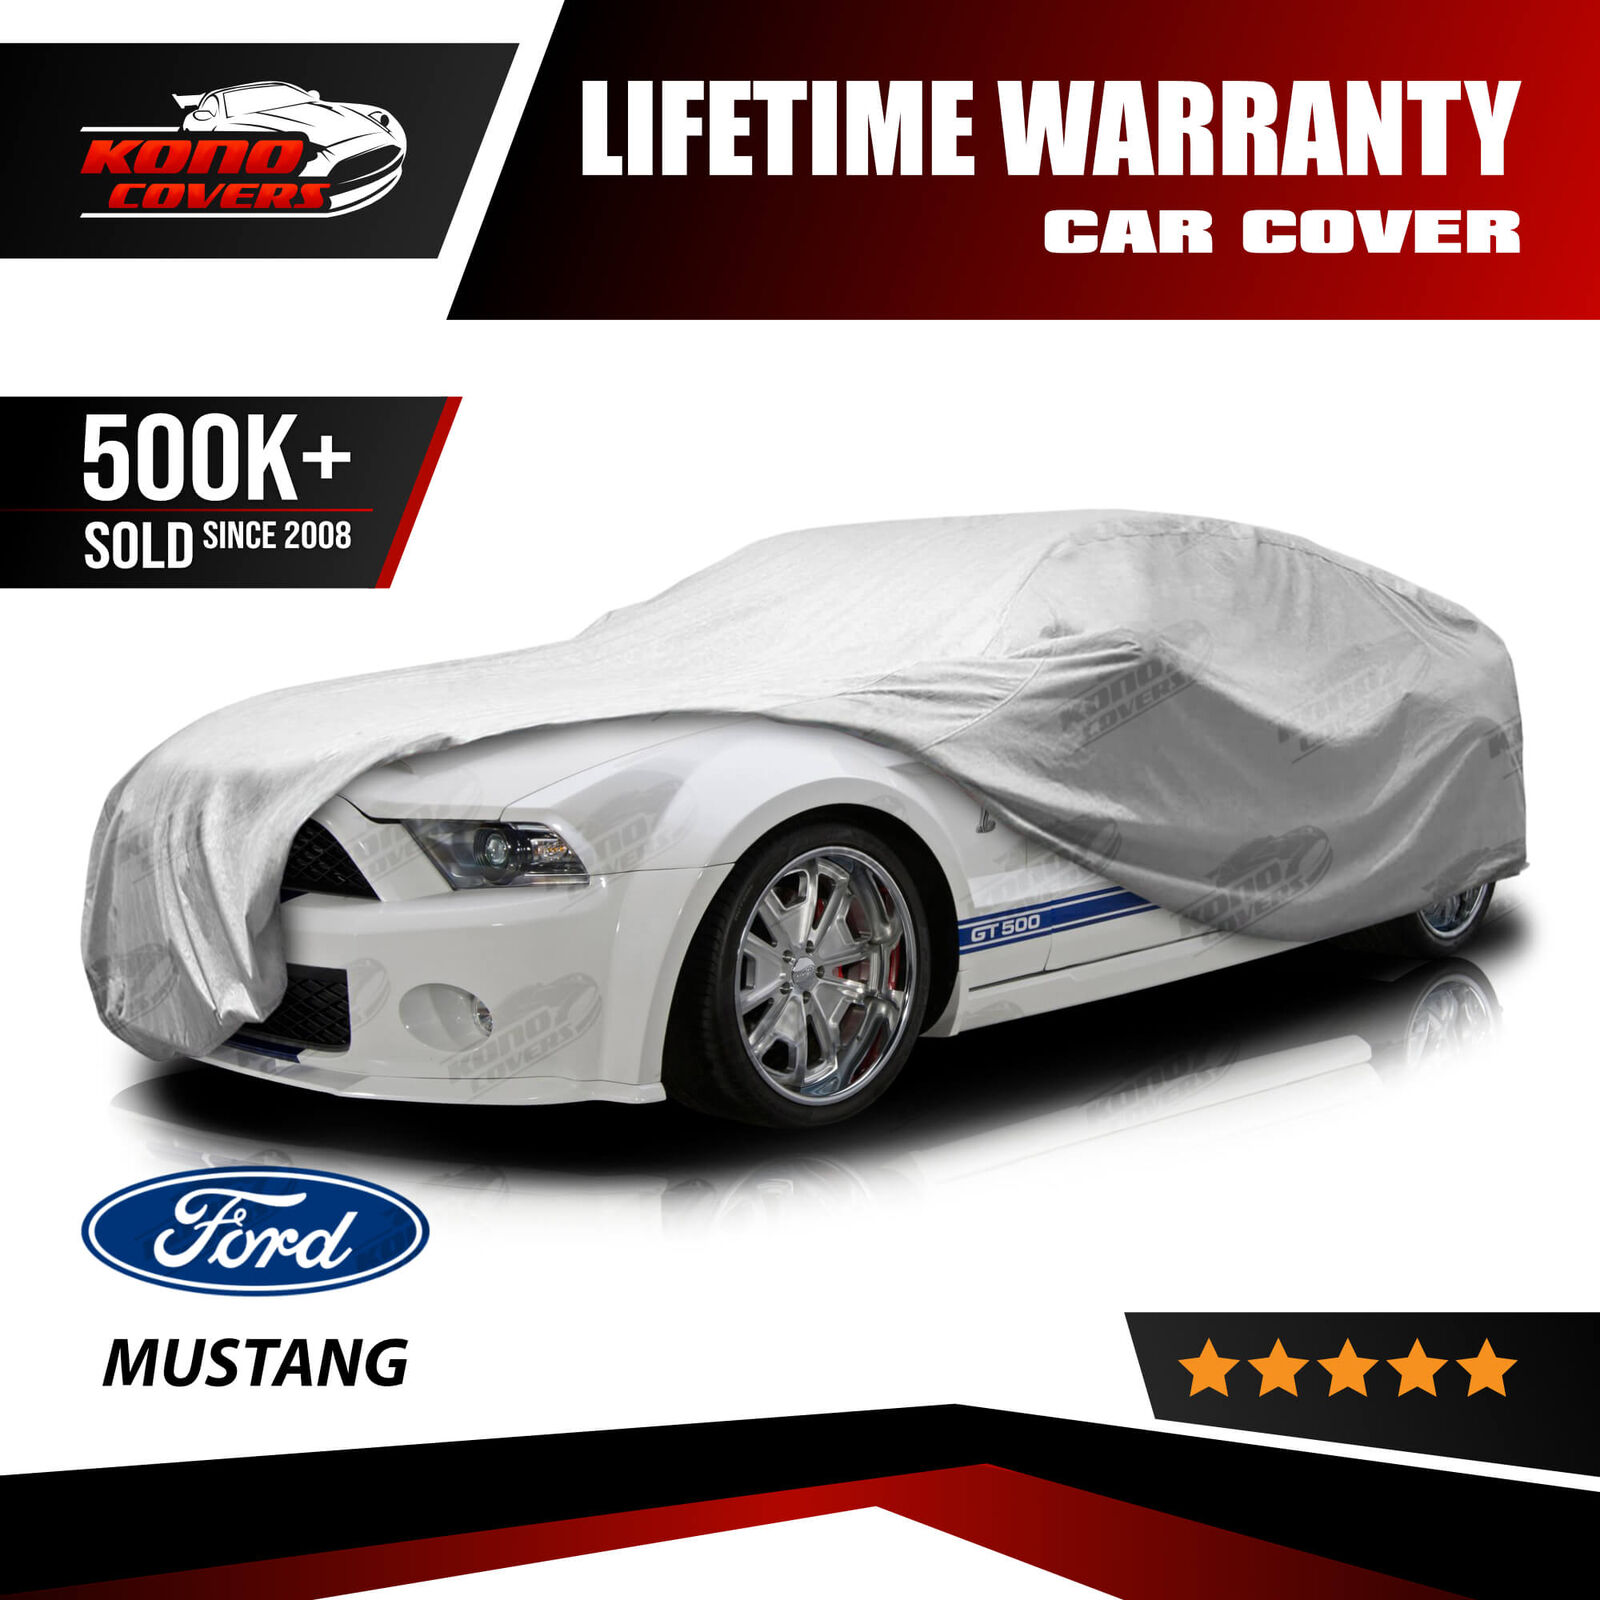 Ford Mustang Saleen Shelby 5 Layer Car Cover 2006 2007 2008 2009 2010 2011 2012